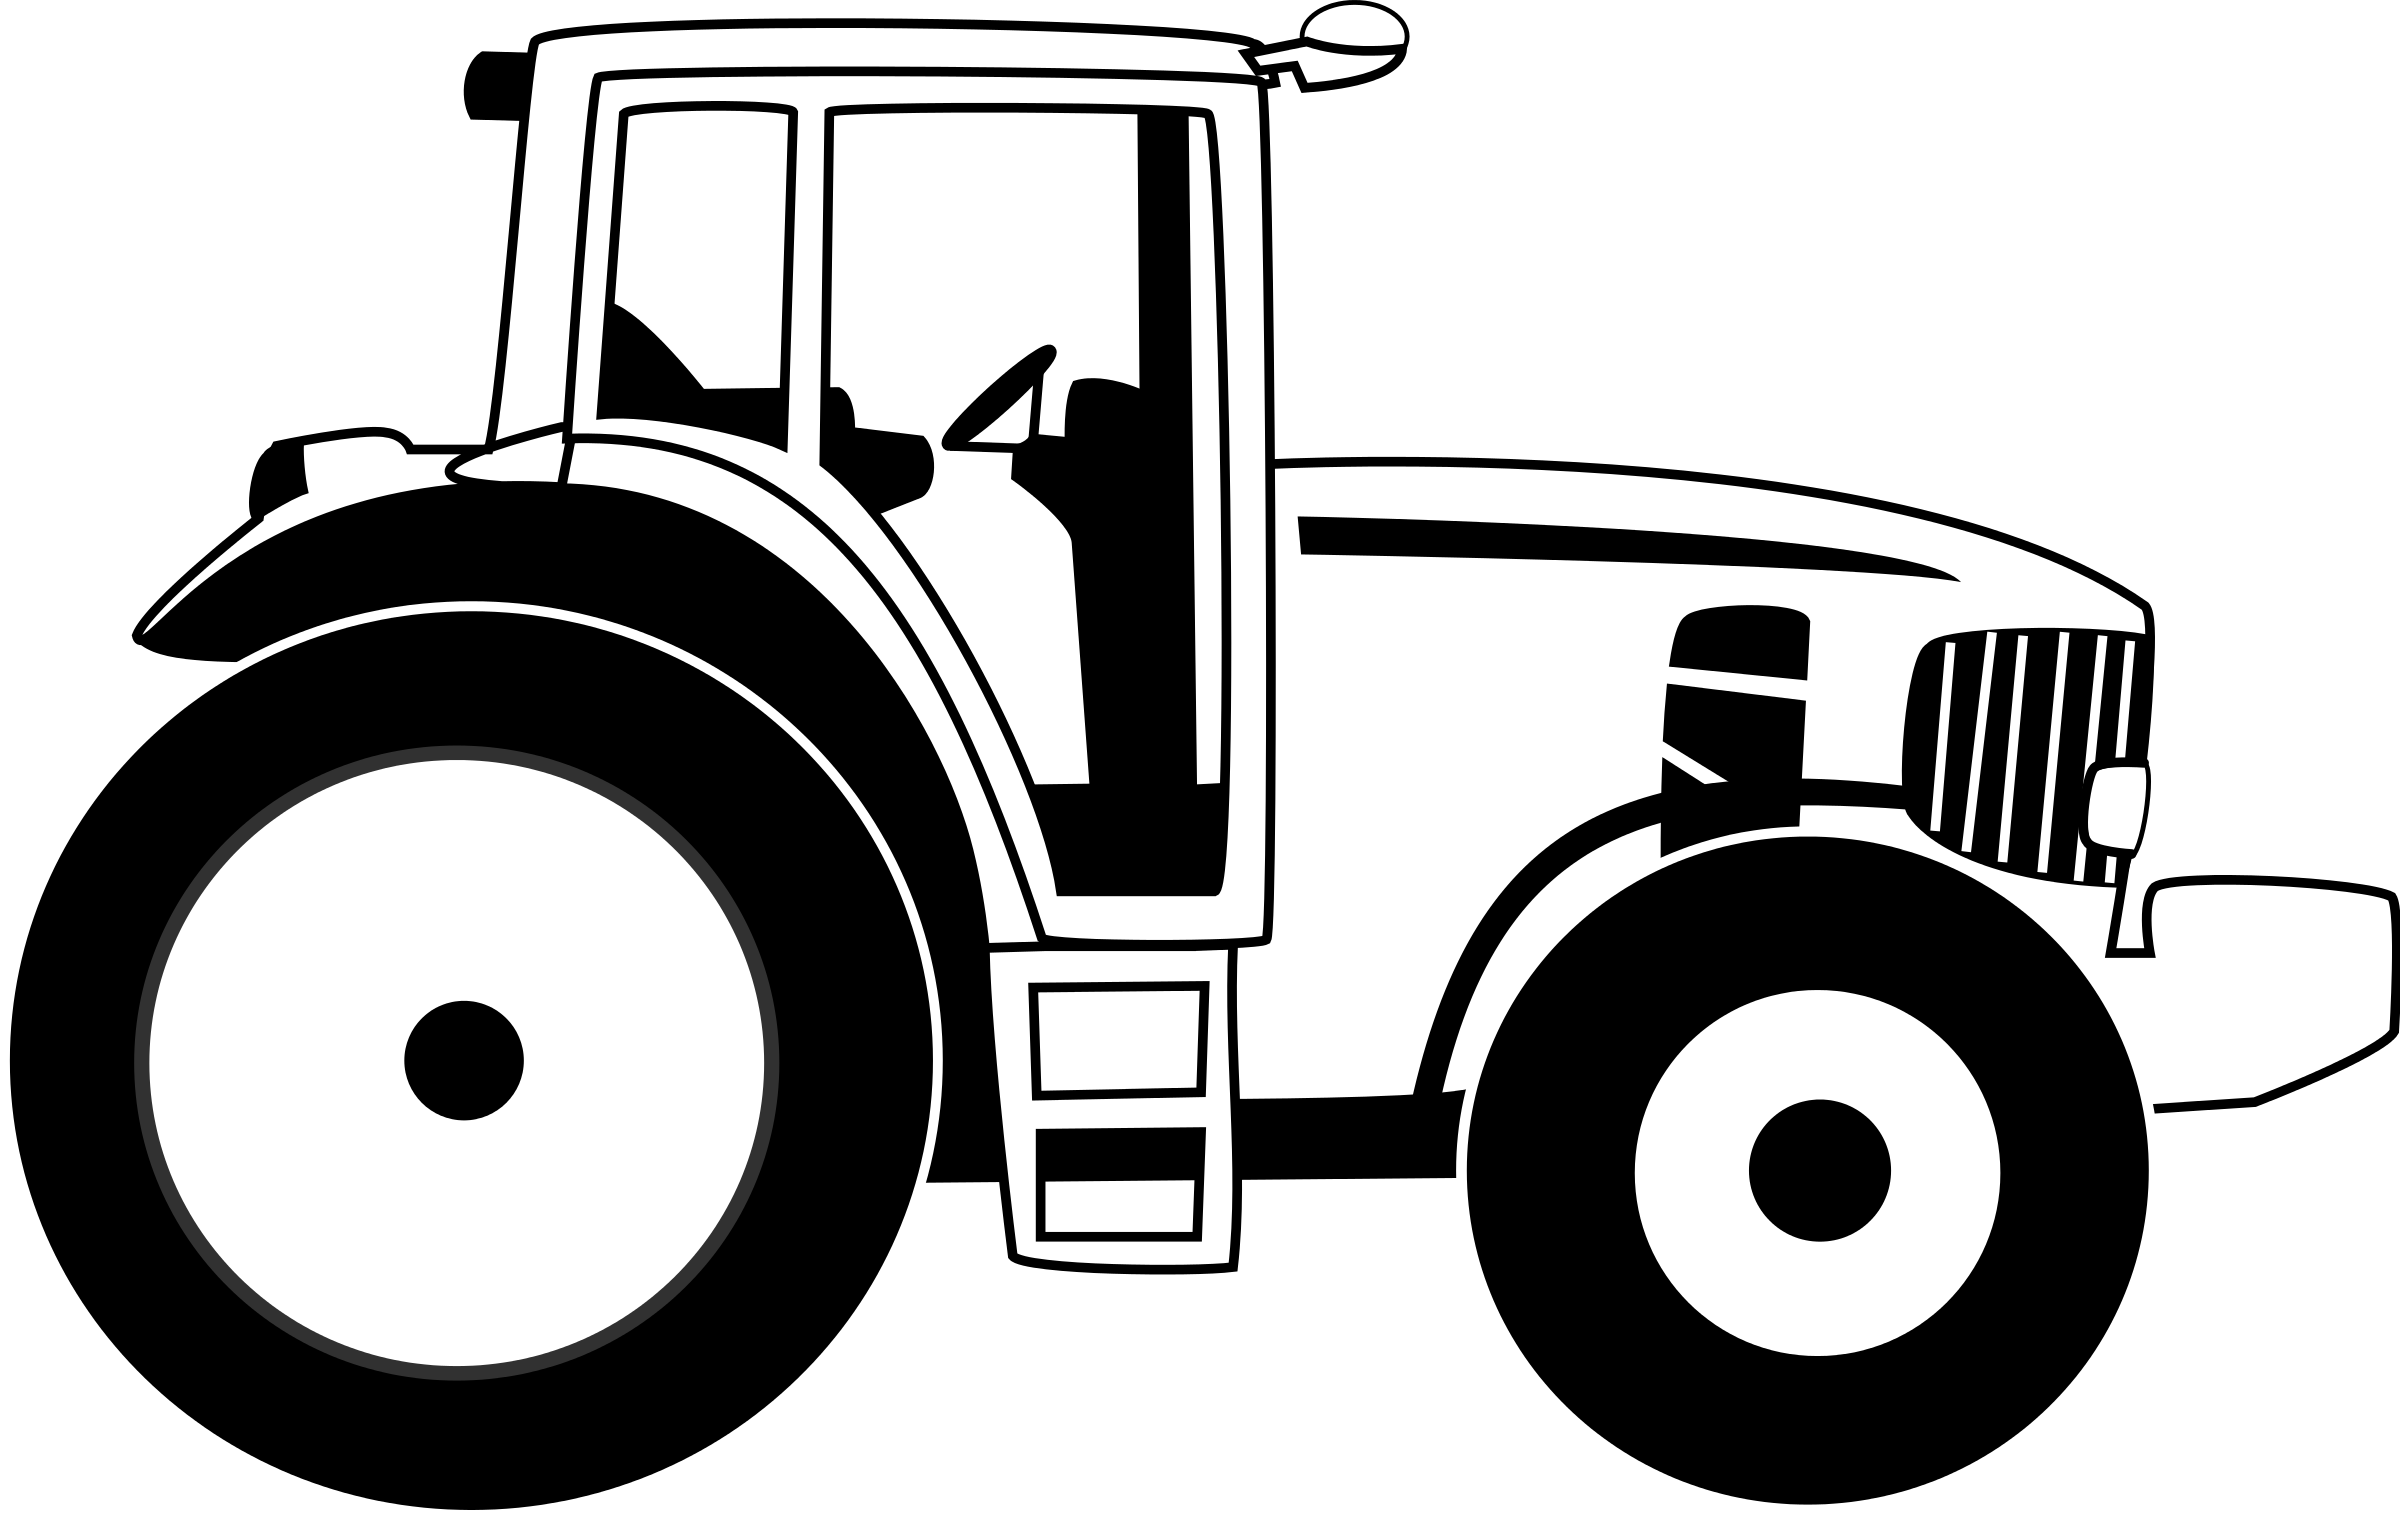 Tractor Clip Art Images | Clipart Panda - Free Clipart Images